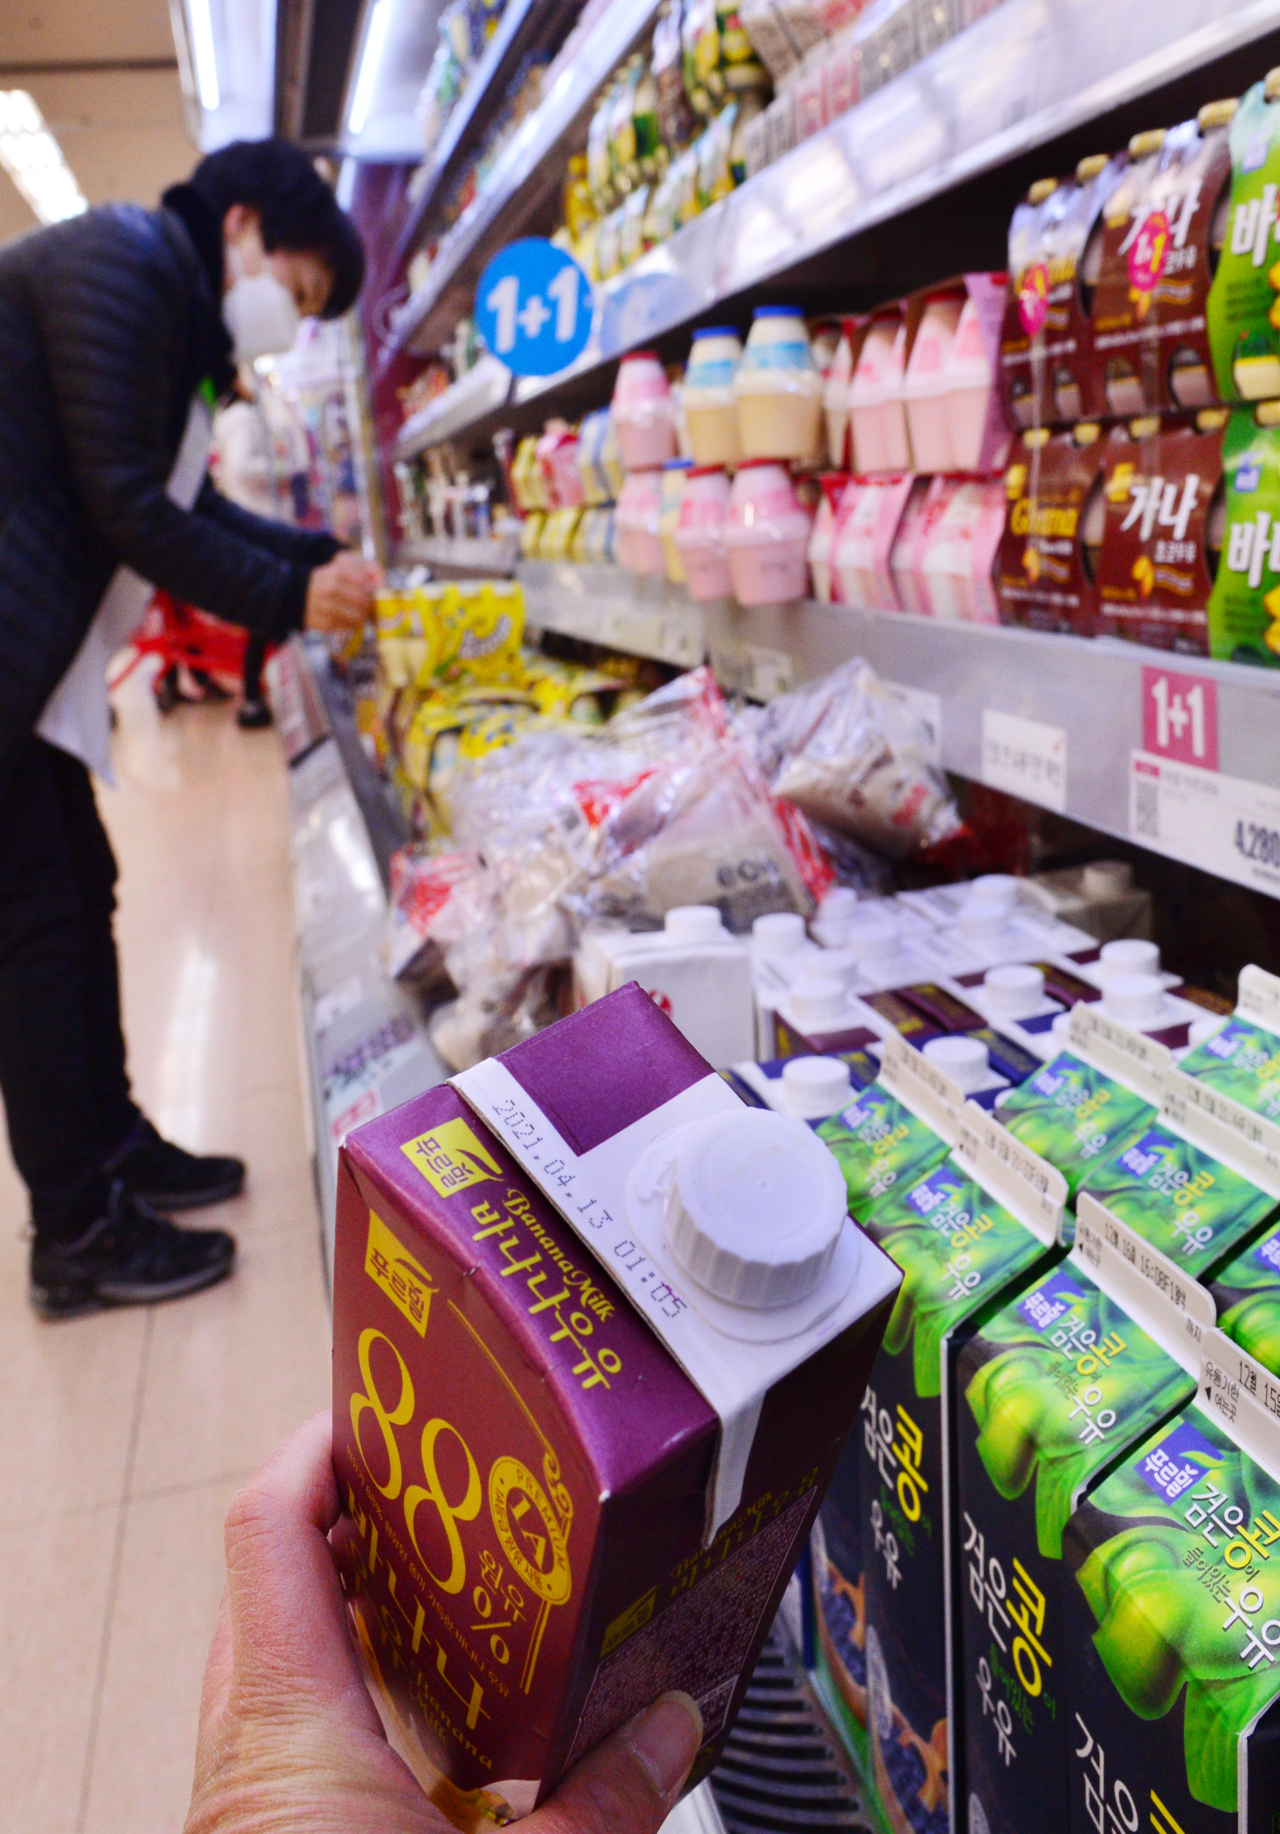 Milk products have sell-by dates on the bottles. (Park Hyun-koo/The Korea Herald)